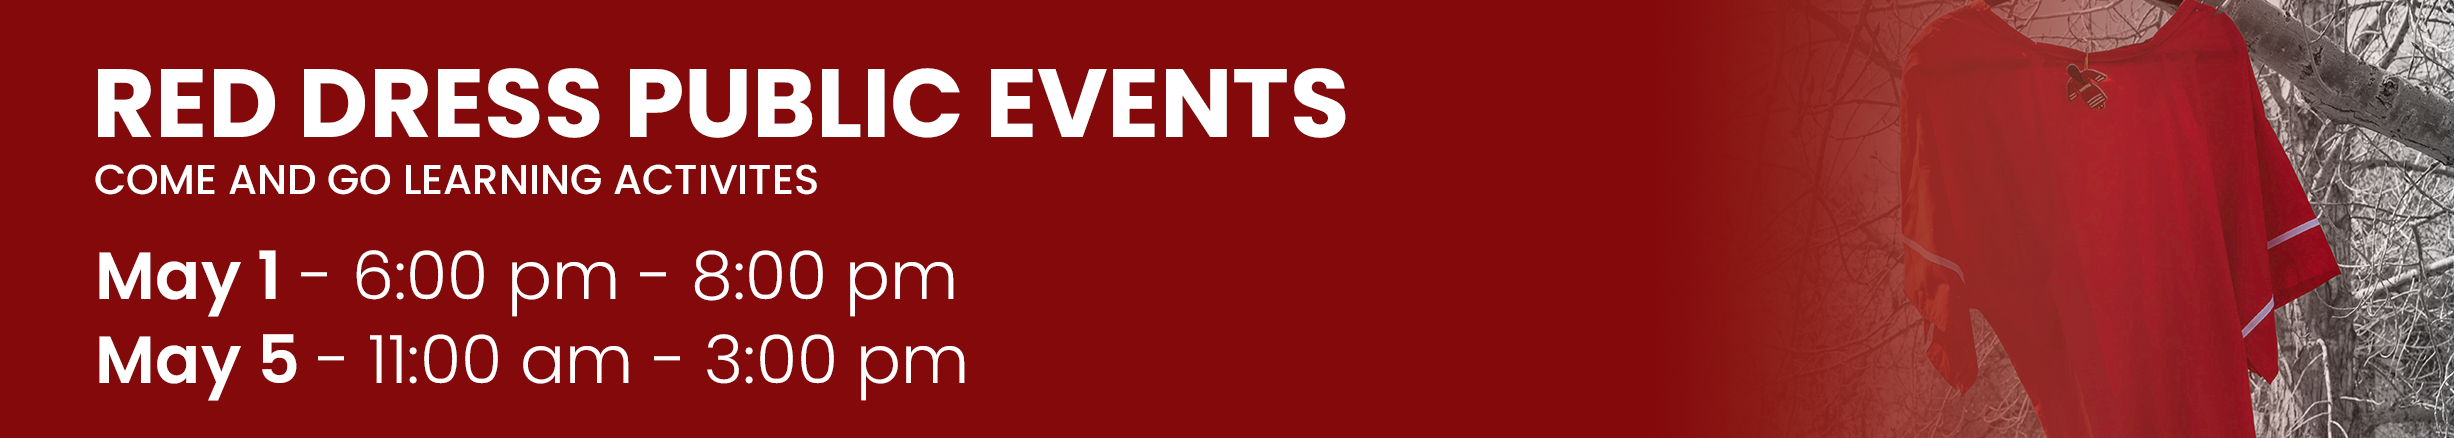 Red Dress Public Events